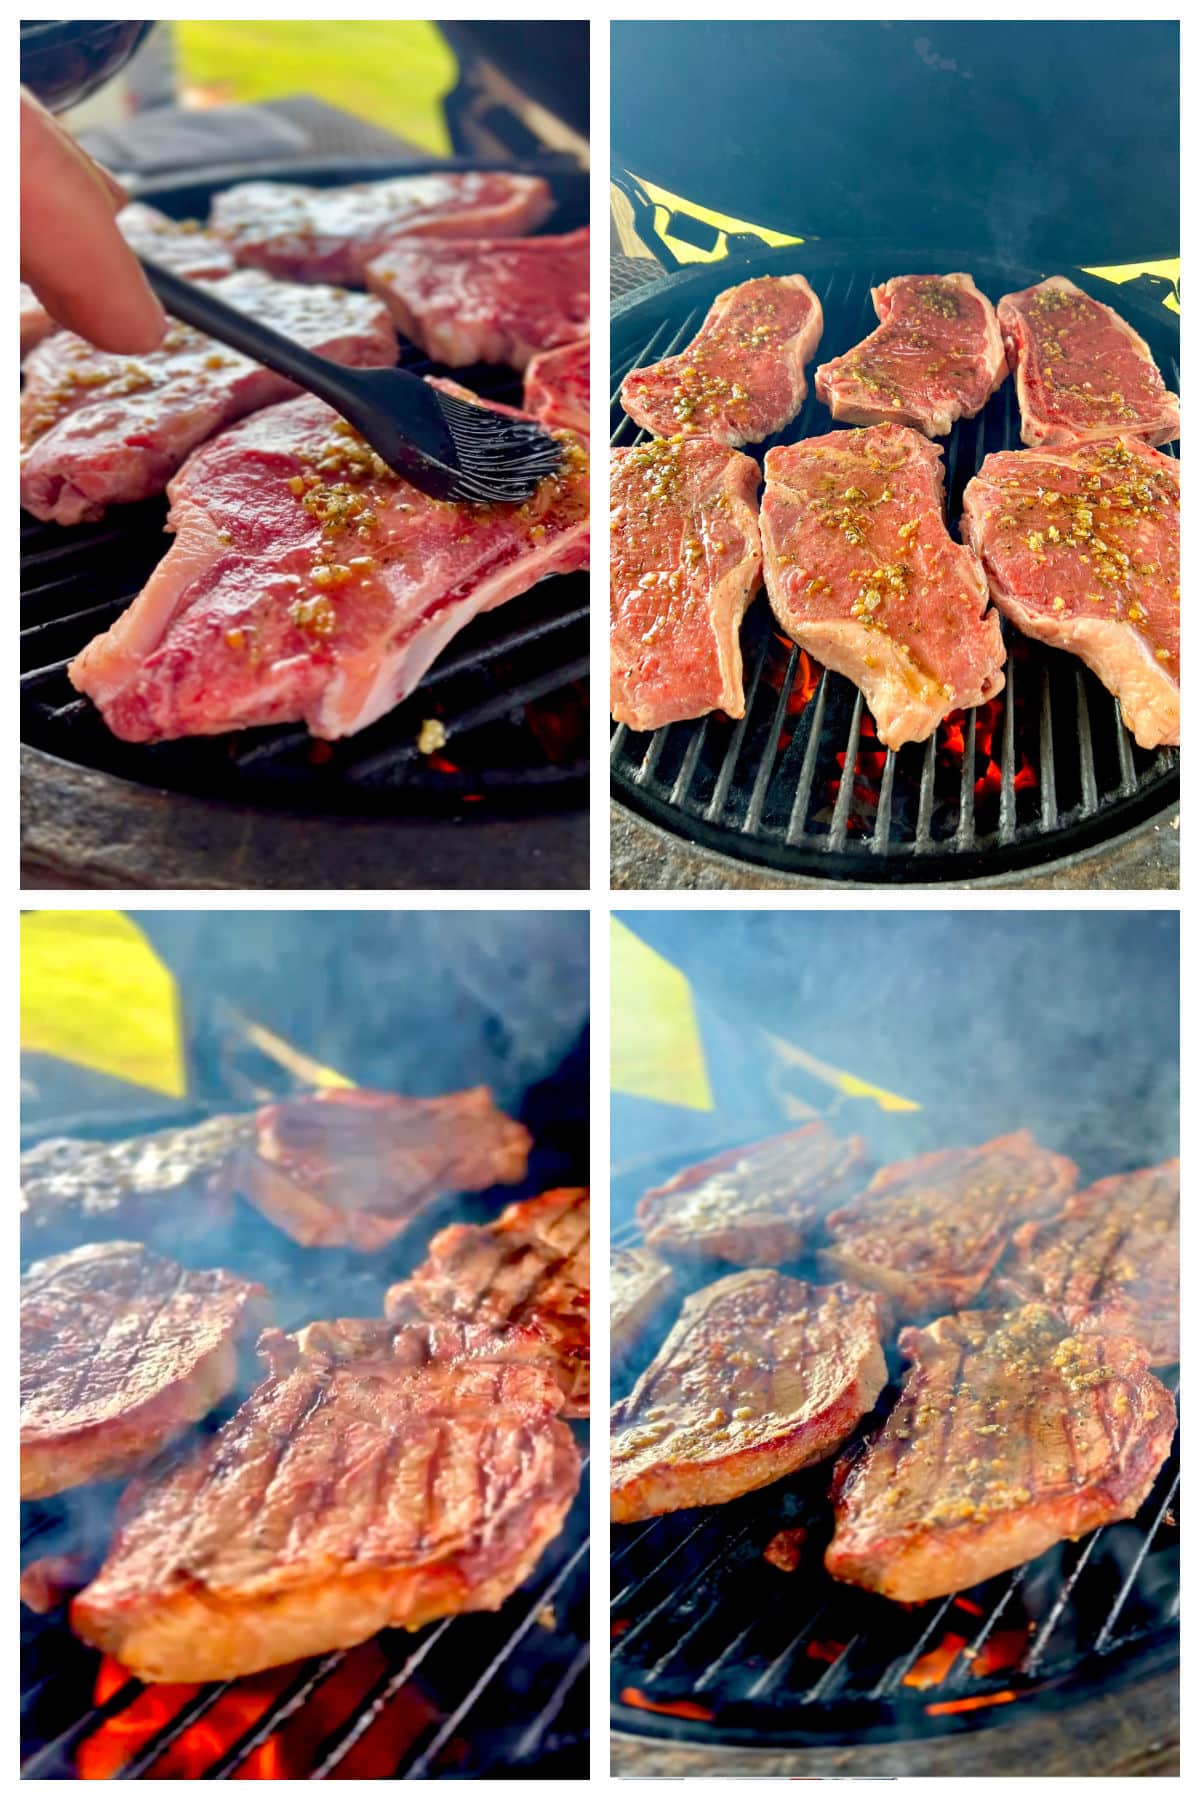 Collage grilling steaks with garlic butter.